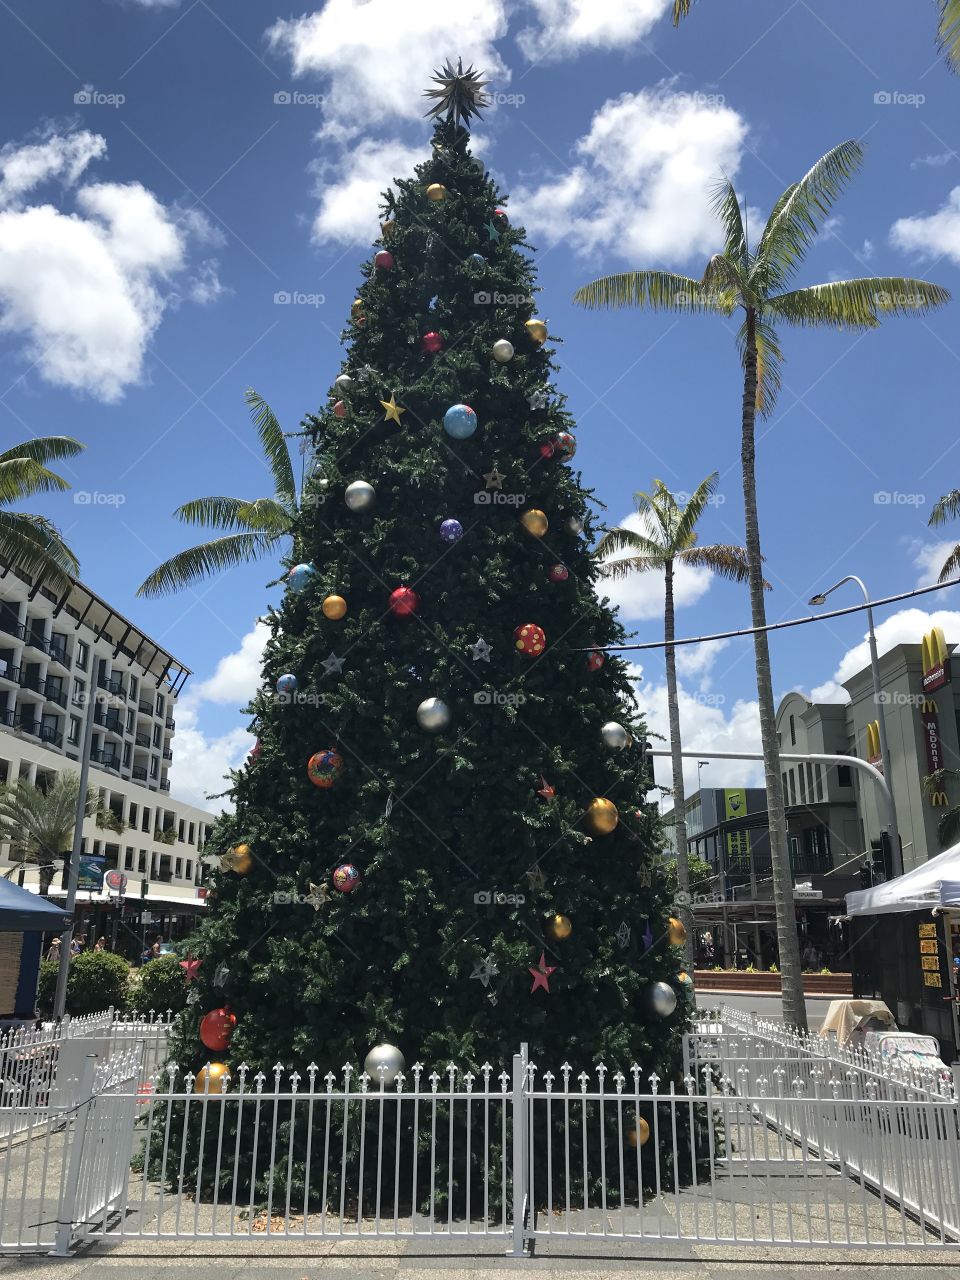 The best Christmas in Cairns